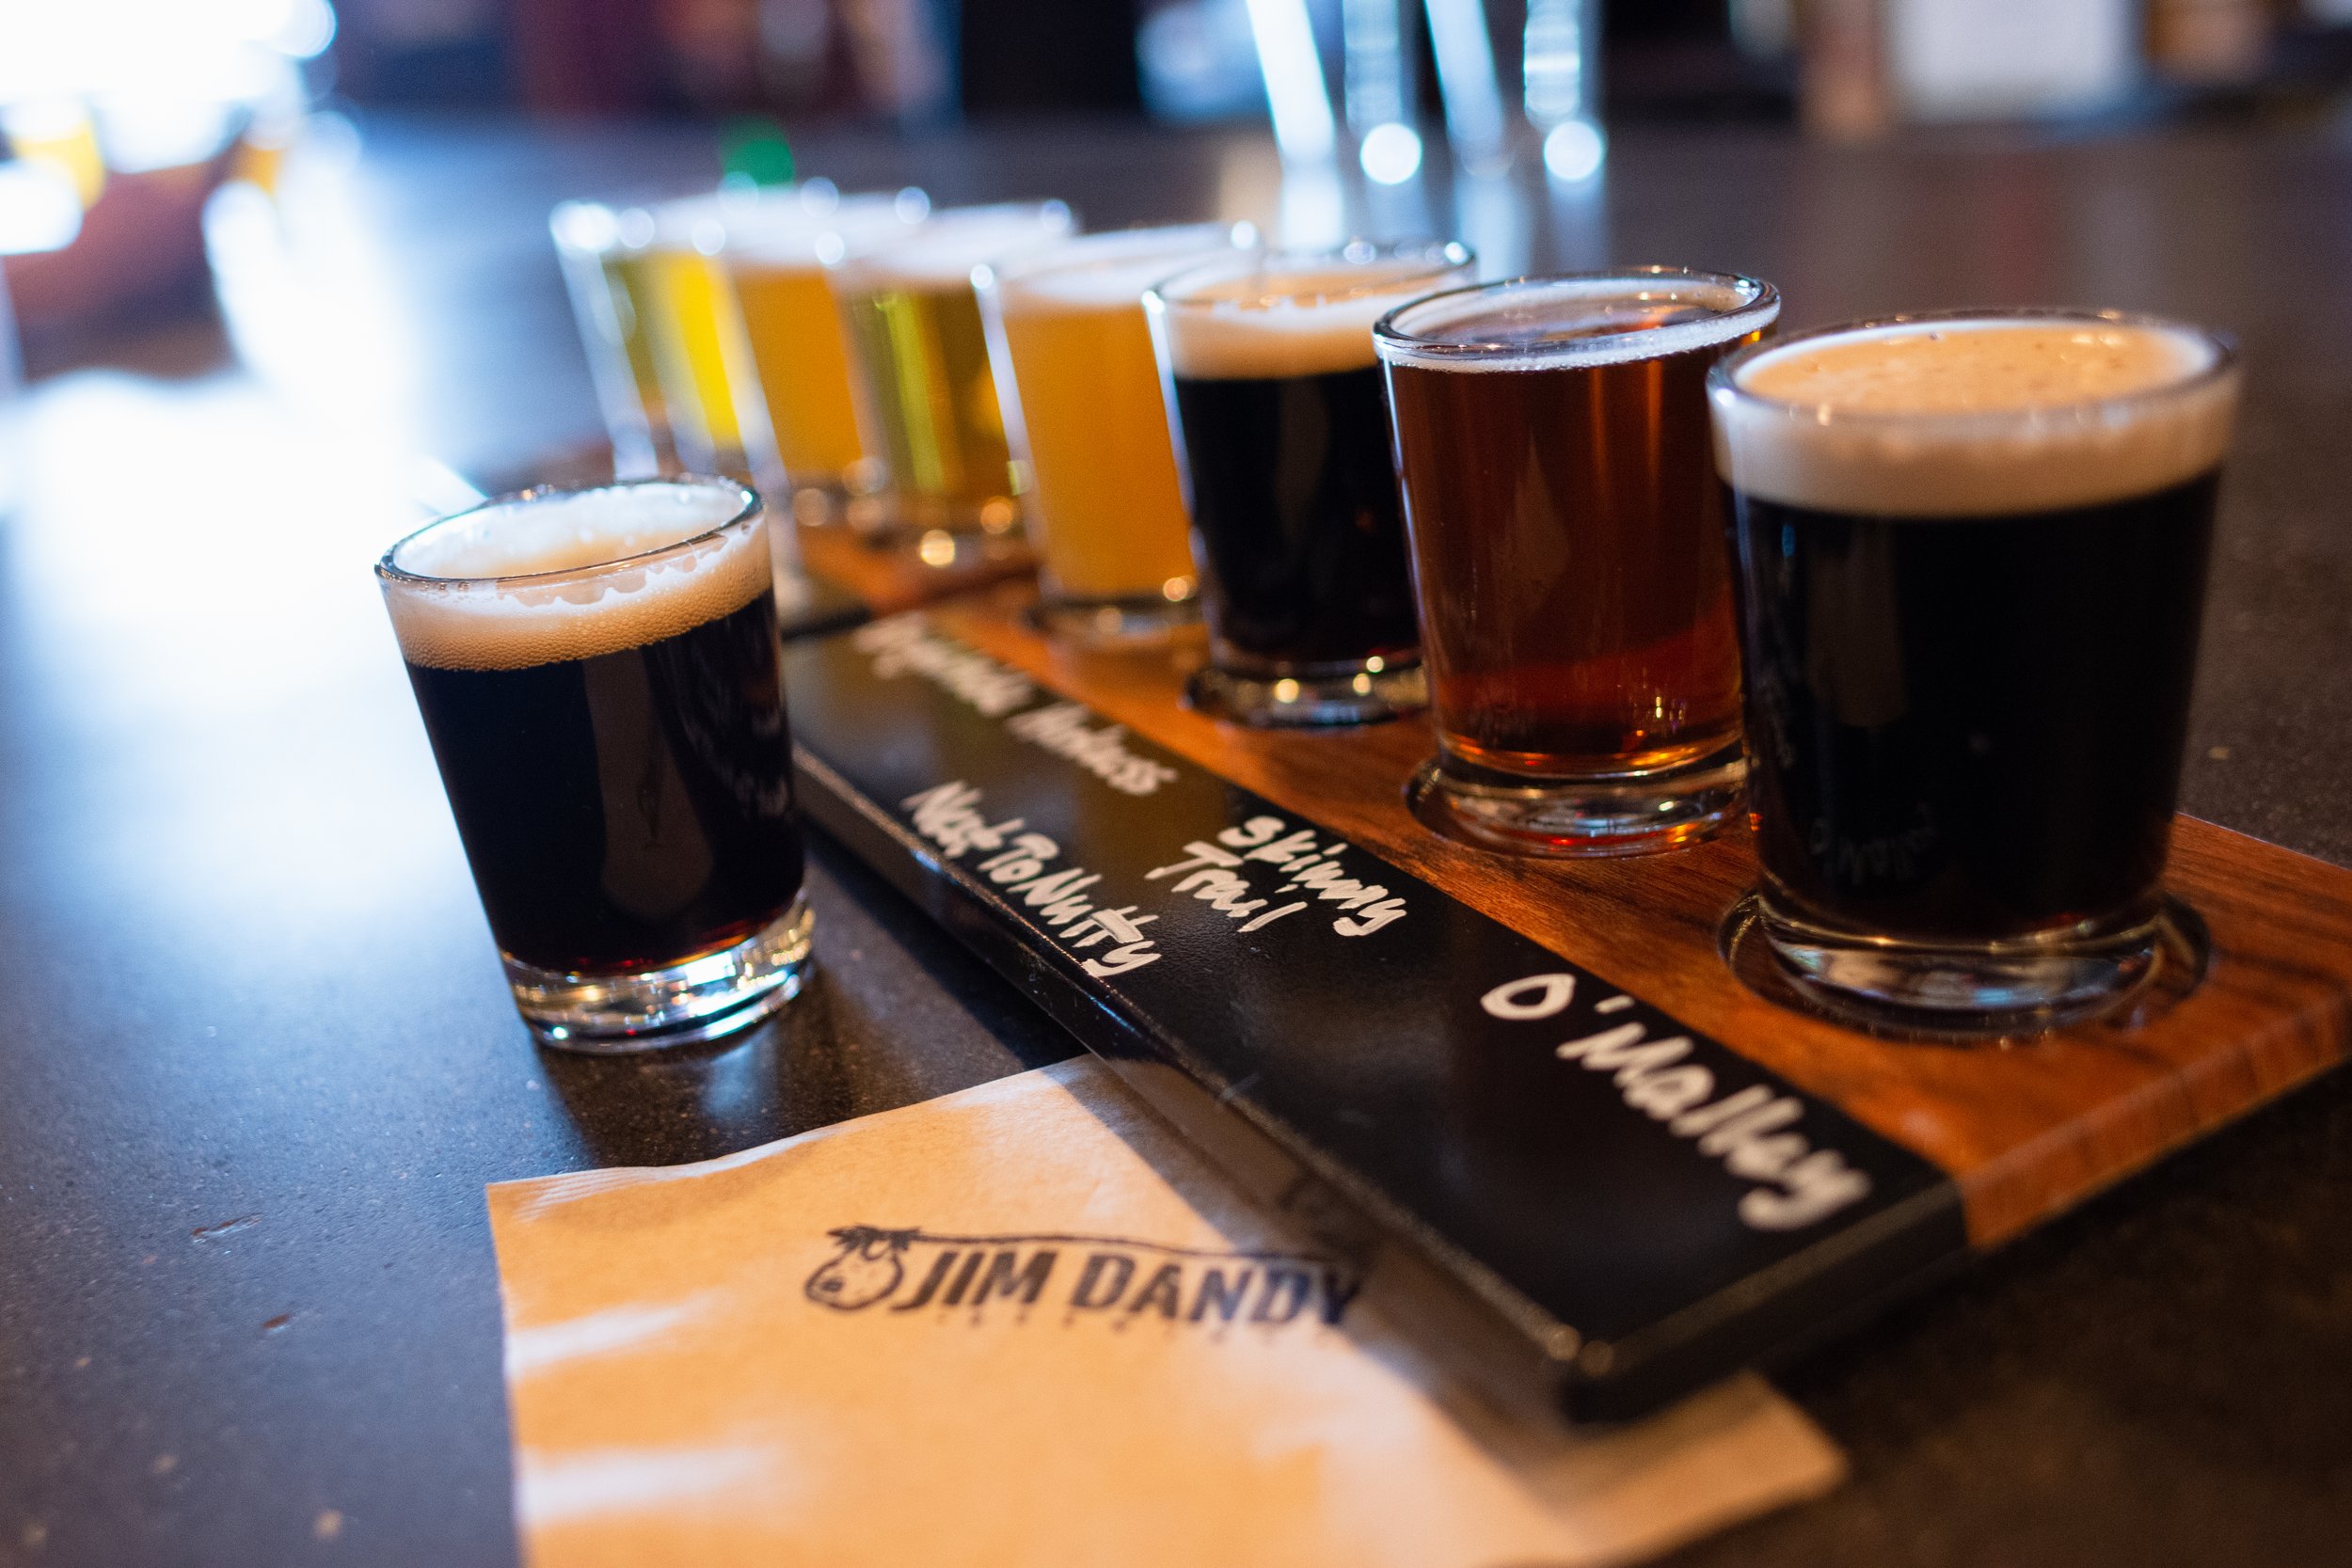  A flight of beers from Jim Dandy. 